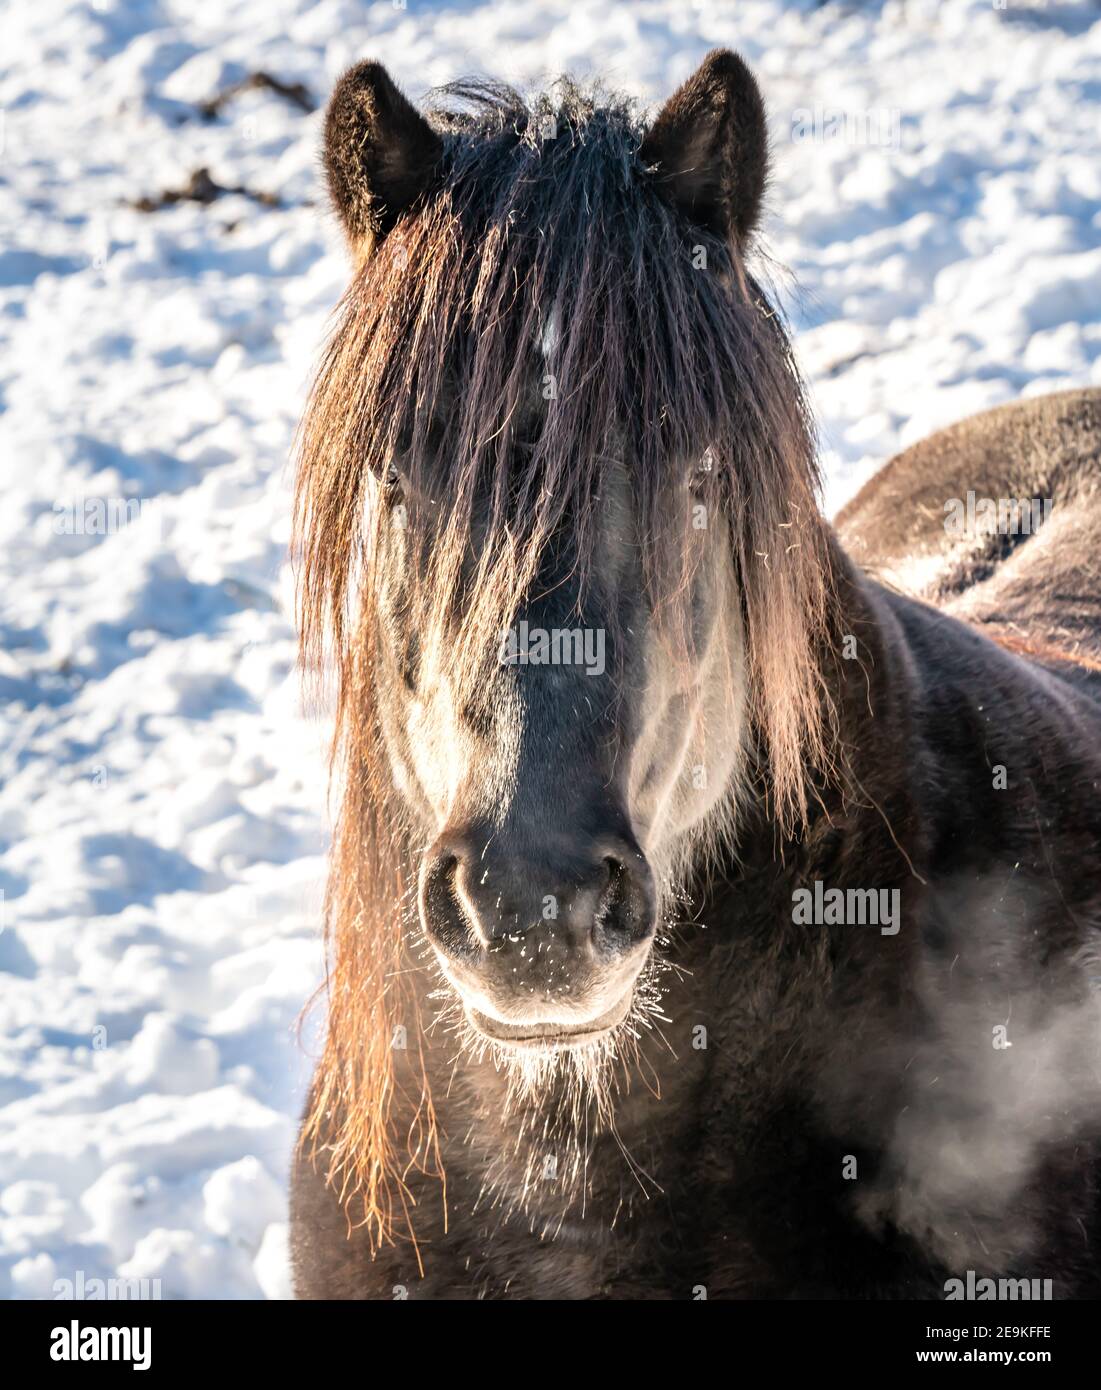 Portrait of a horse with close up of the head. Stock Photo